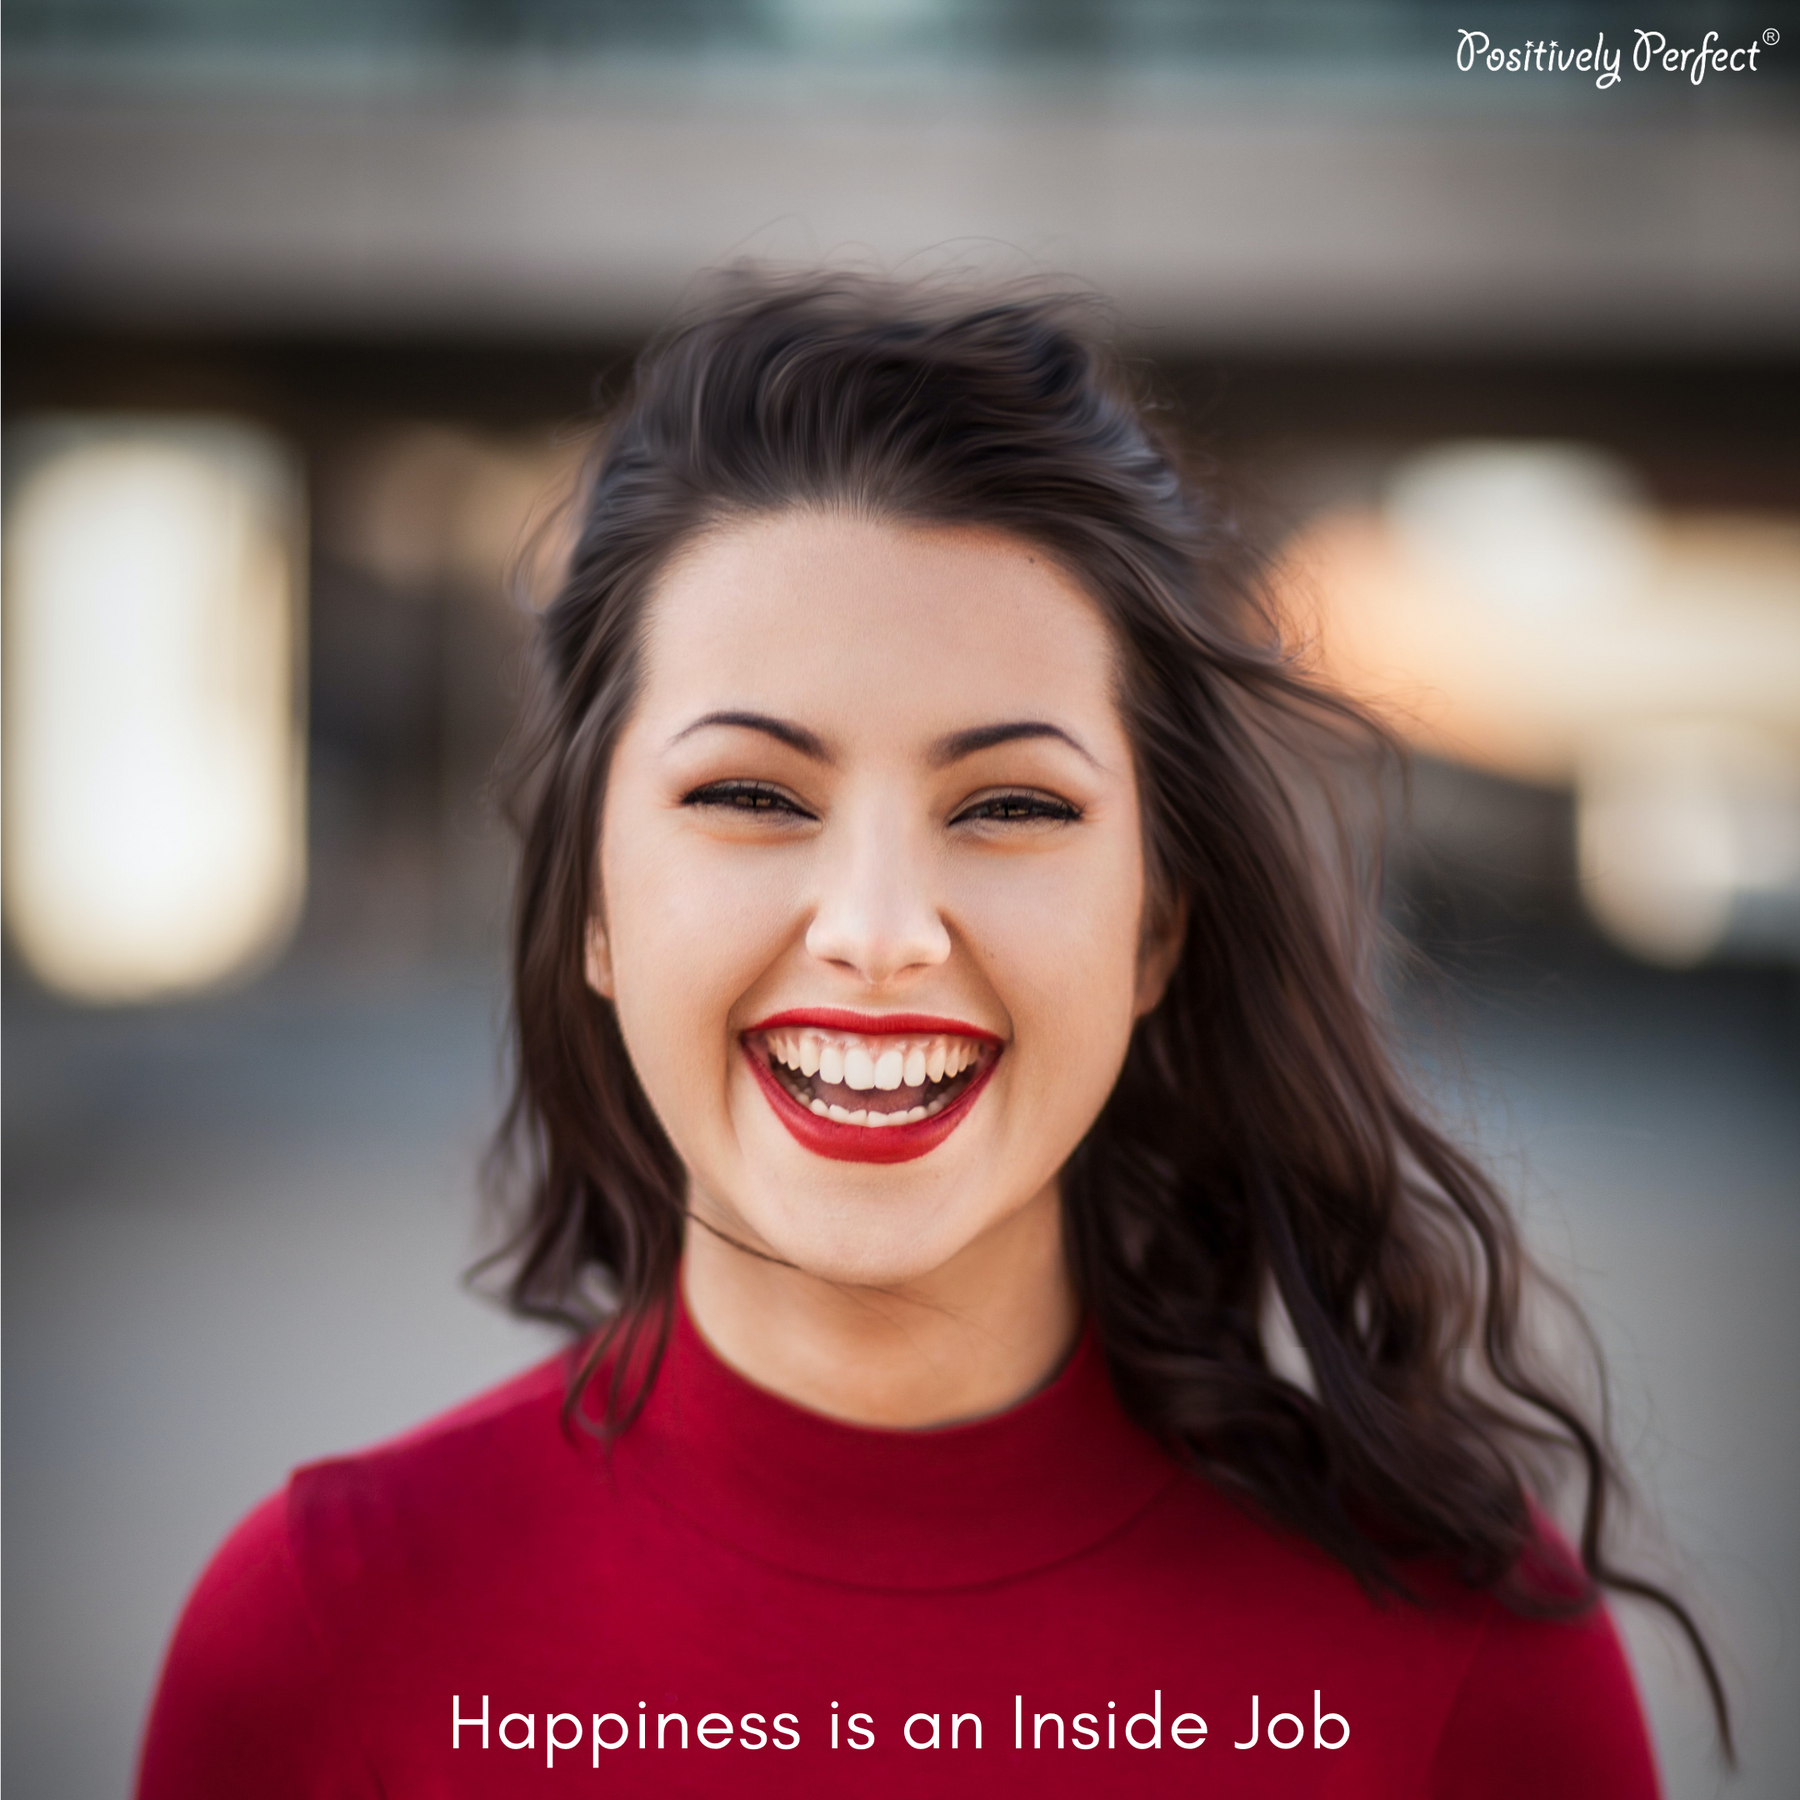 Happiness is an inside job